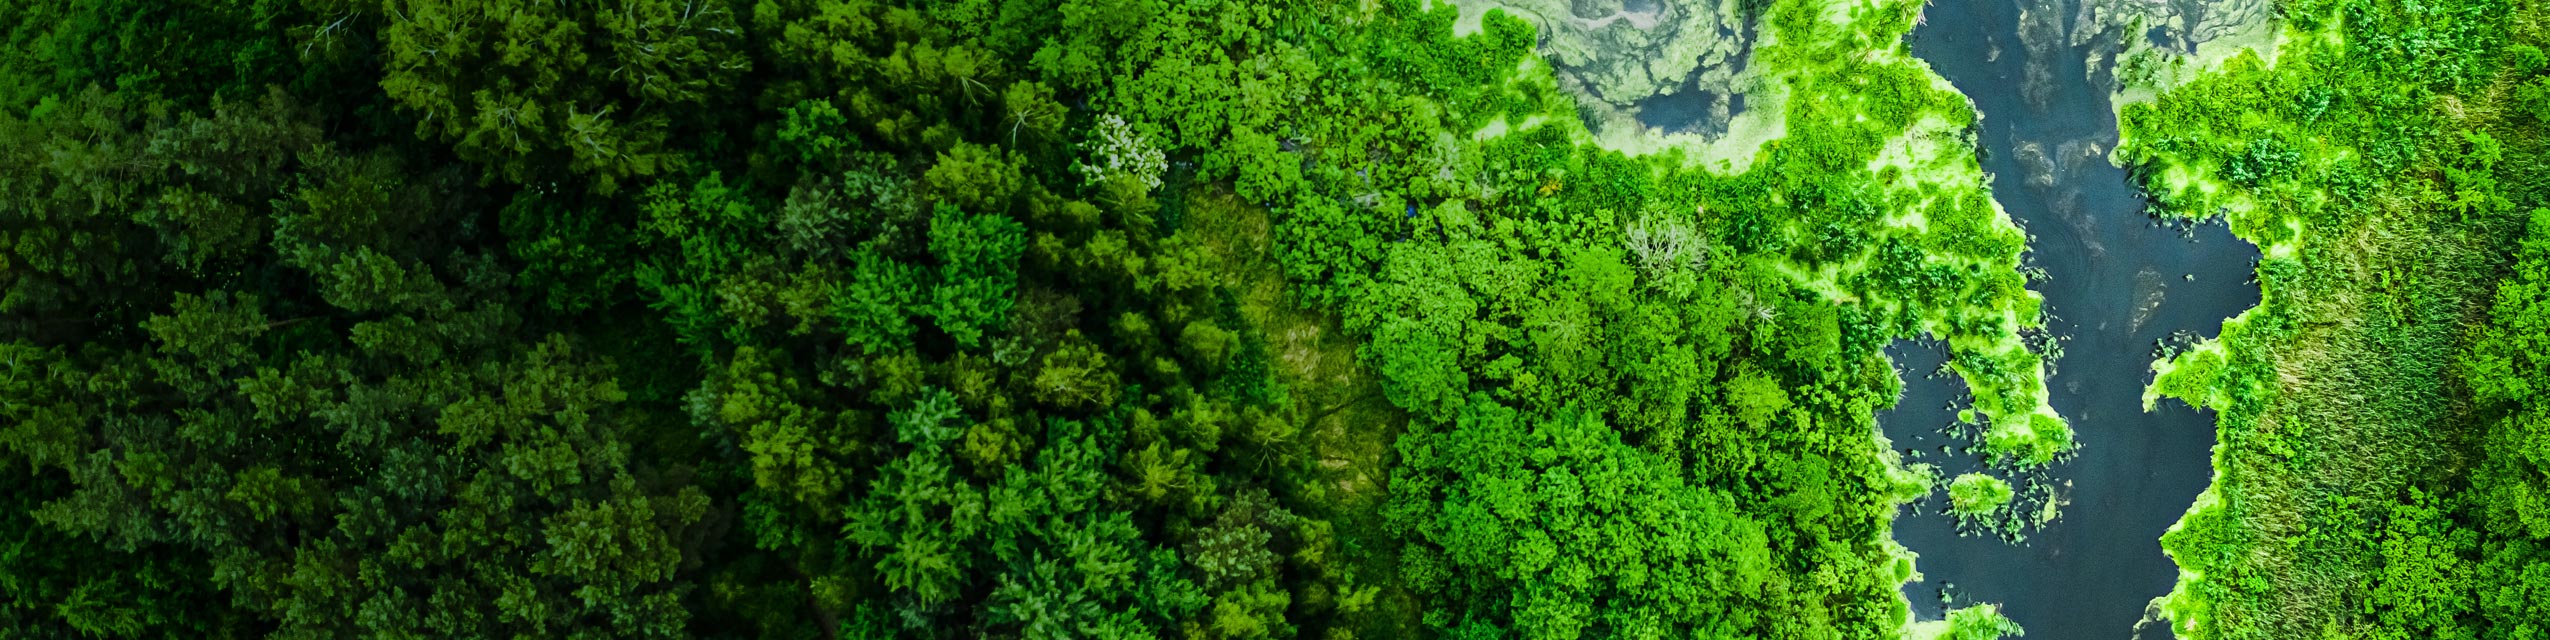 Overhead view of green forest and water.